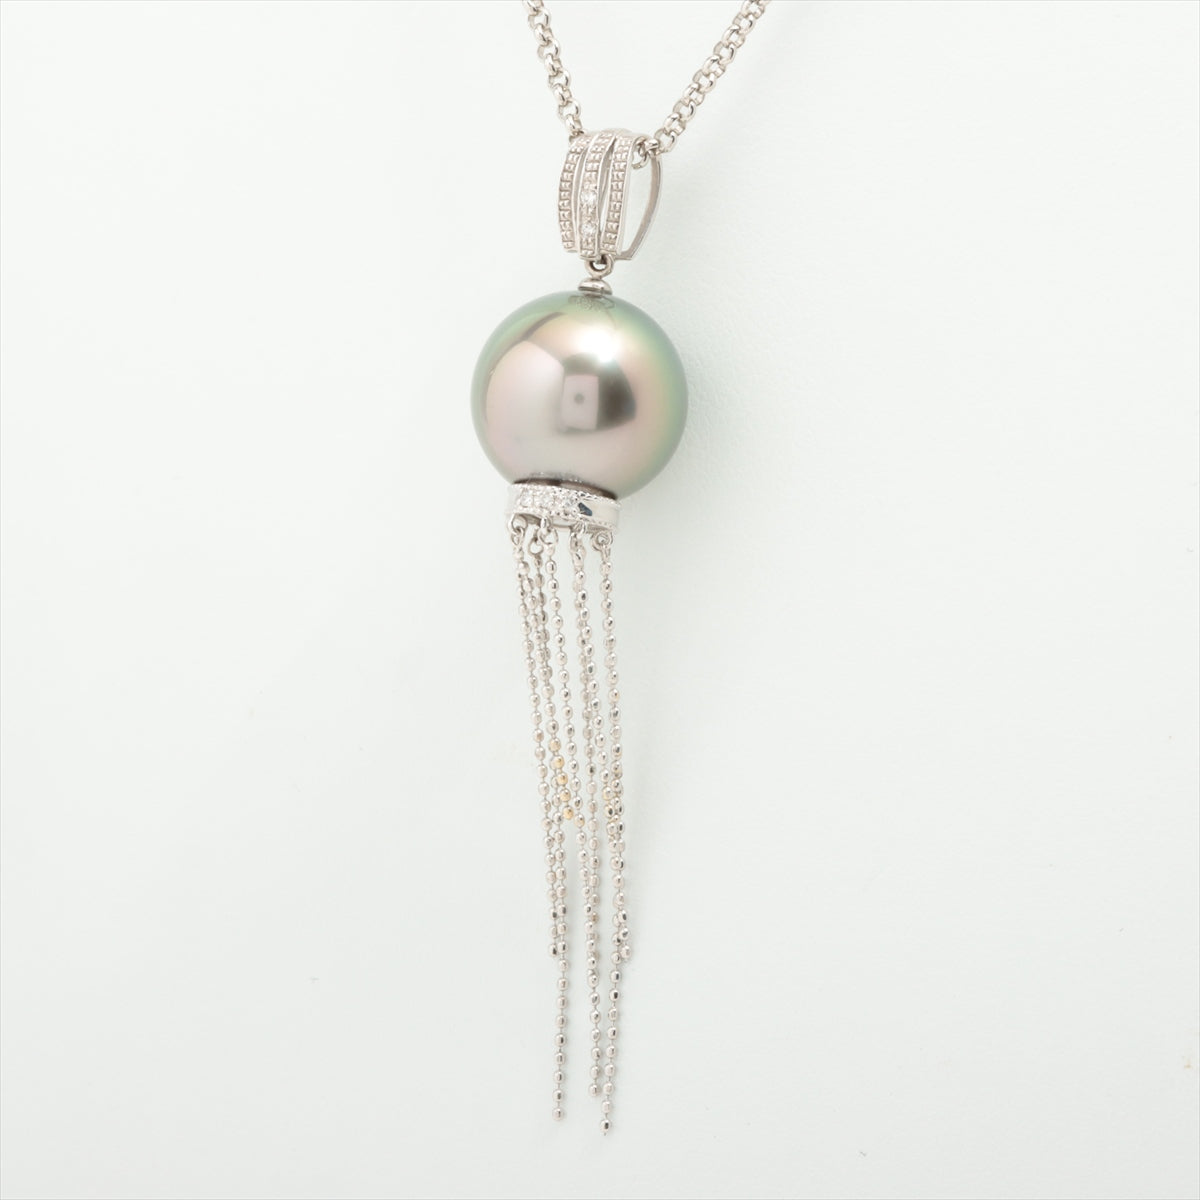 Pearl diamond Necklace Pt850×K18WG 13.7g 0.01 0.01 Approx. 15.0 mm